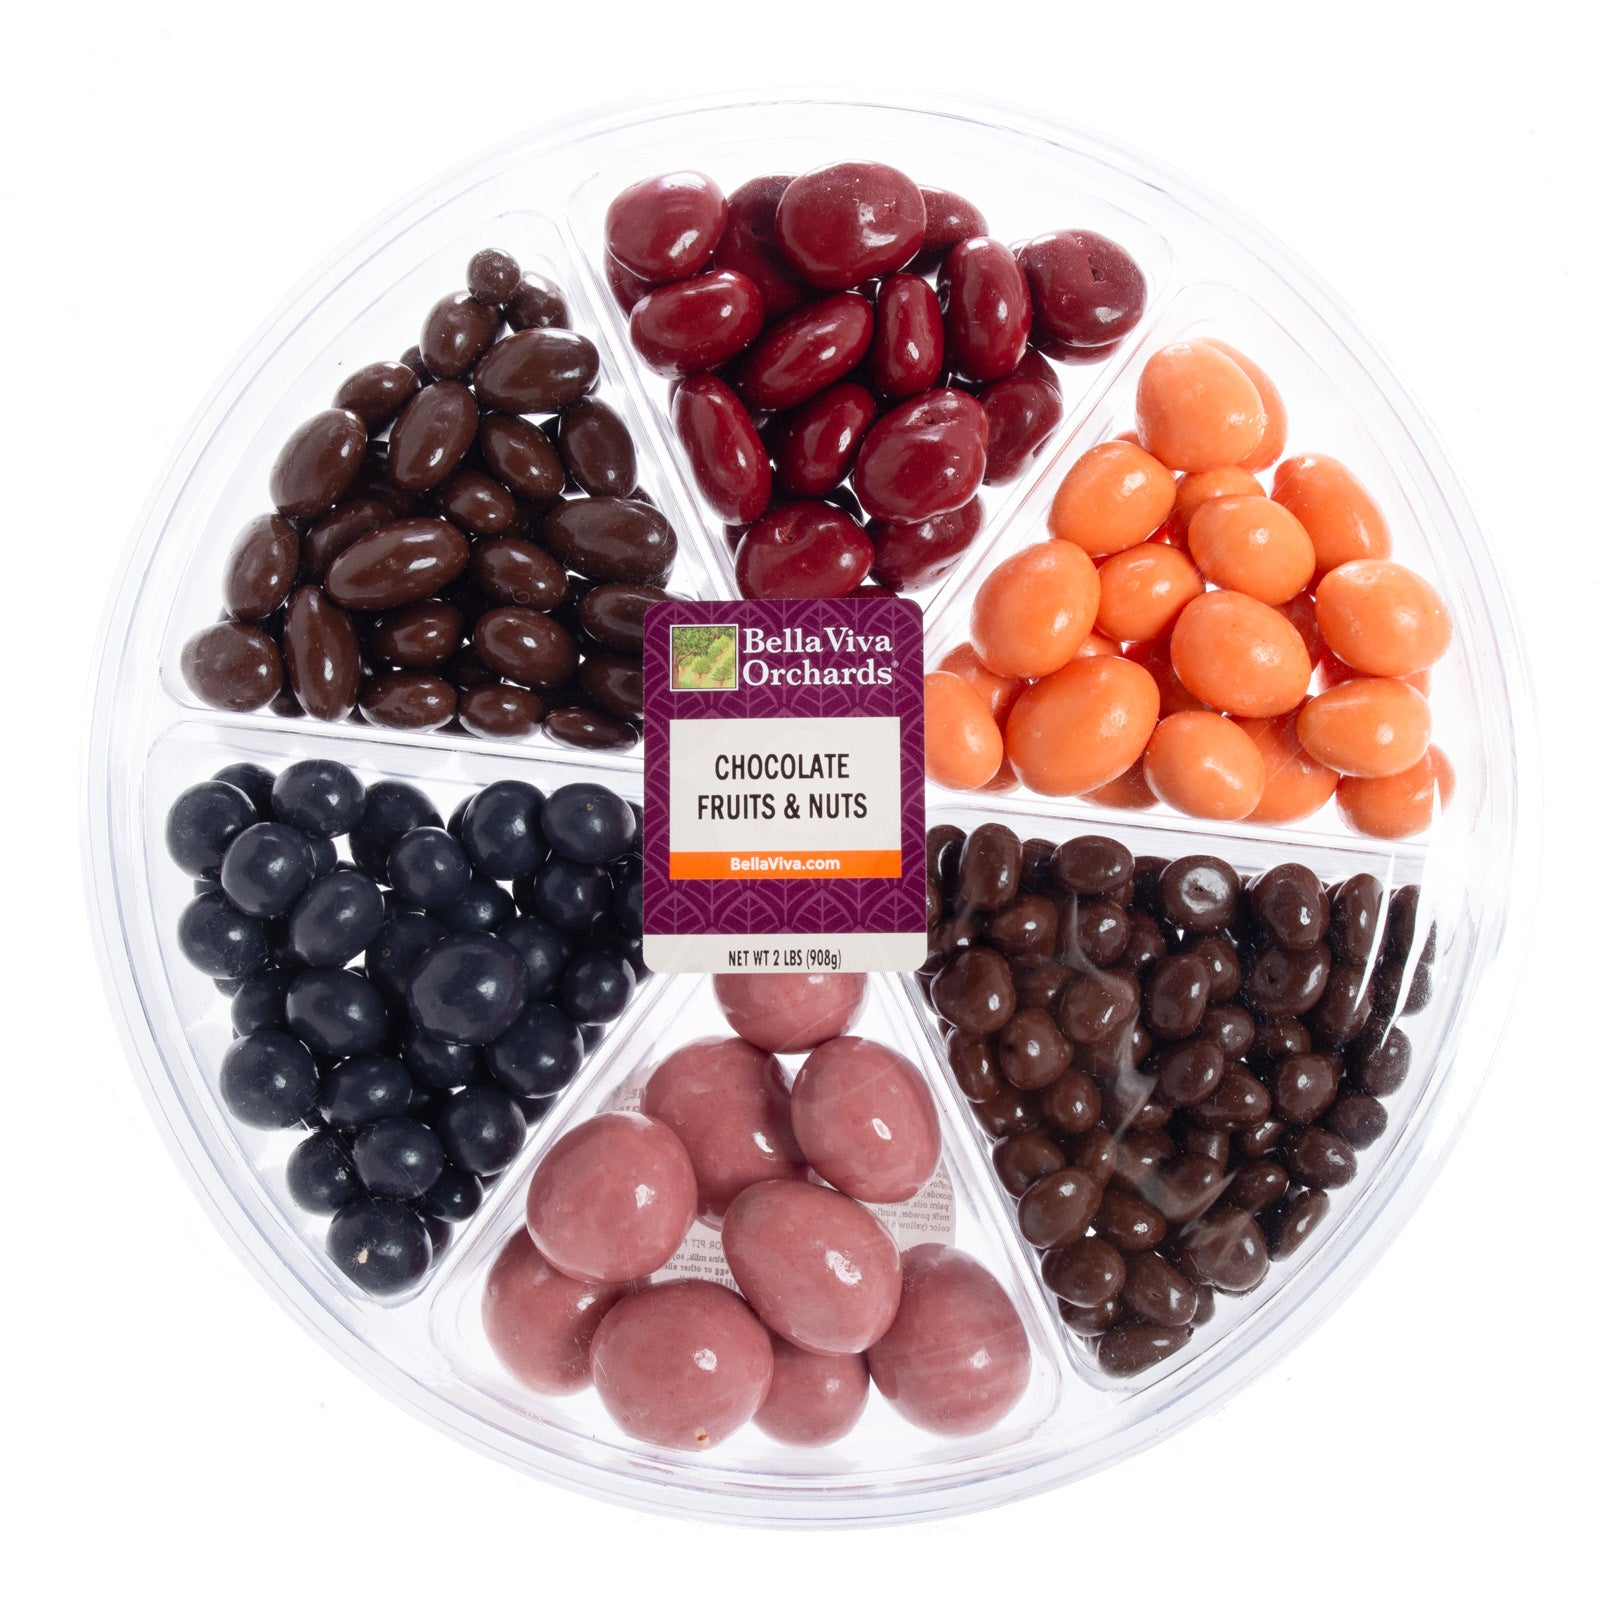 Chocolate Fruits & Nuts Tray, 2 lbs